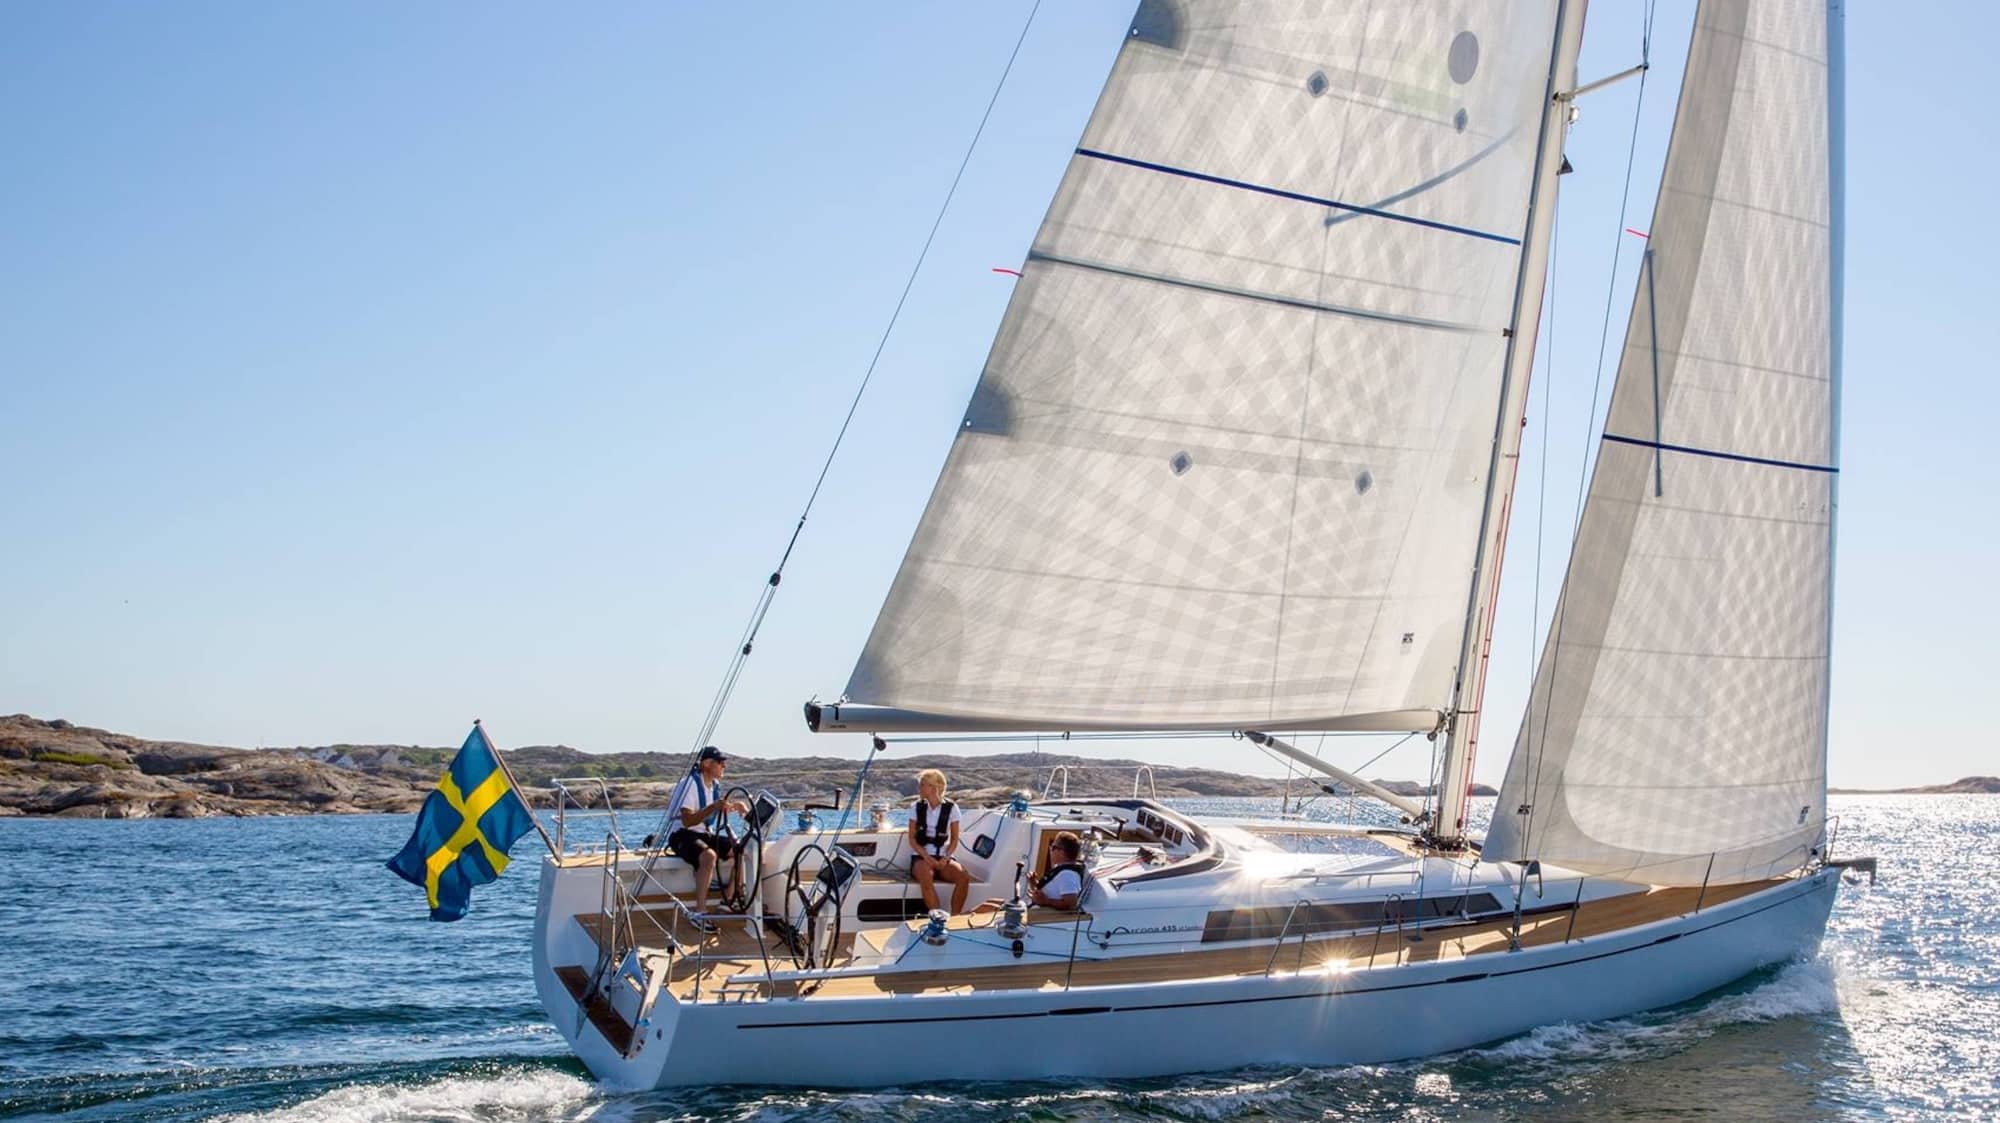 Cruising sails - Most sailors tend to both cruise and race. Therefore, we primarily offer “performance" cruising sails. Even those who never race want their boat to sail well and reliably. Our performance c